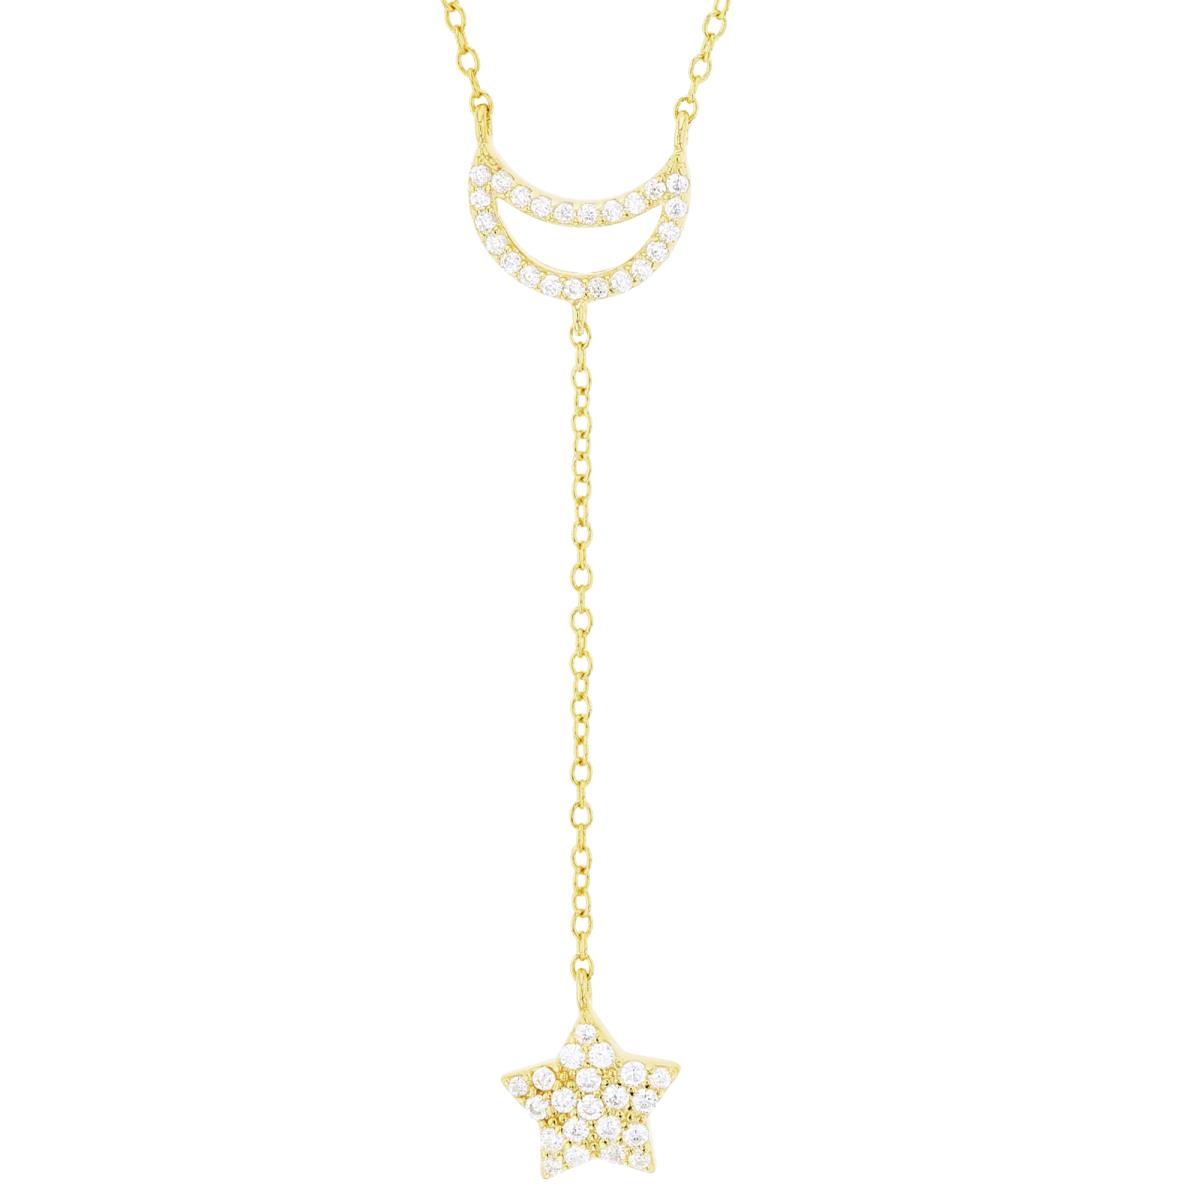 Sterling Silver+1Micron Yellow Gold Rnd White CZ Moon with Star Dangling on 1.5"Spool 16+2"Necklace